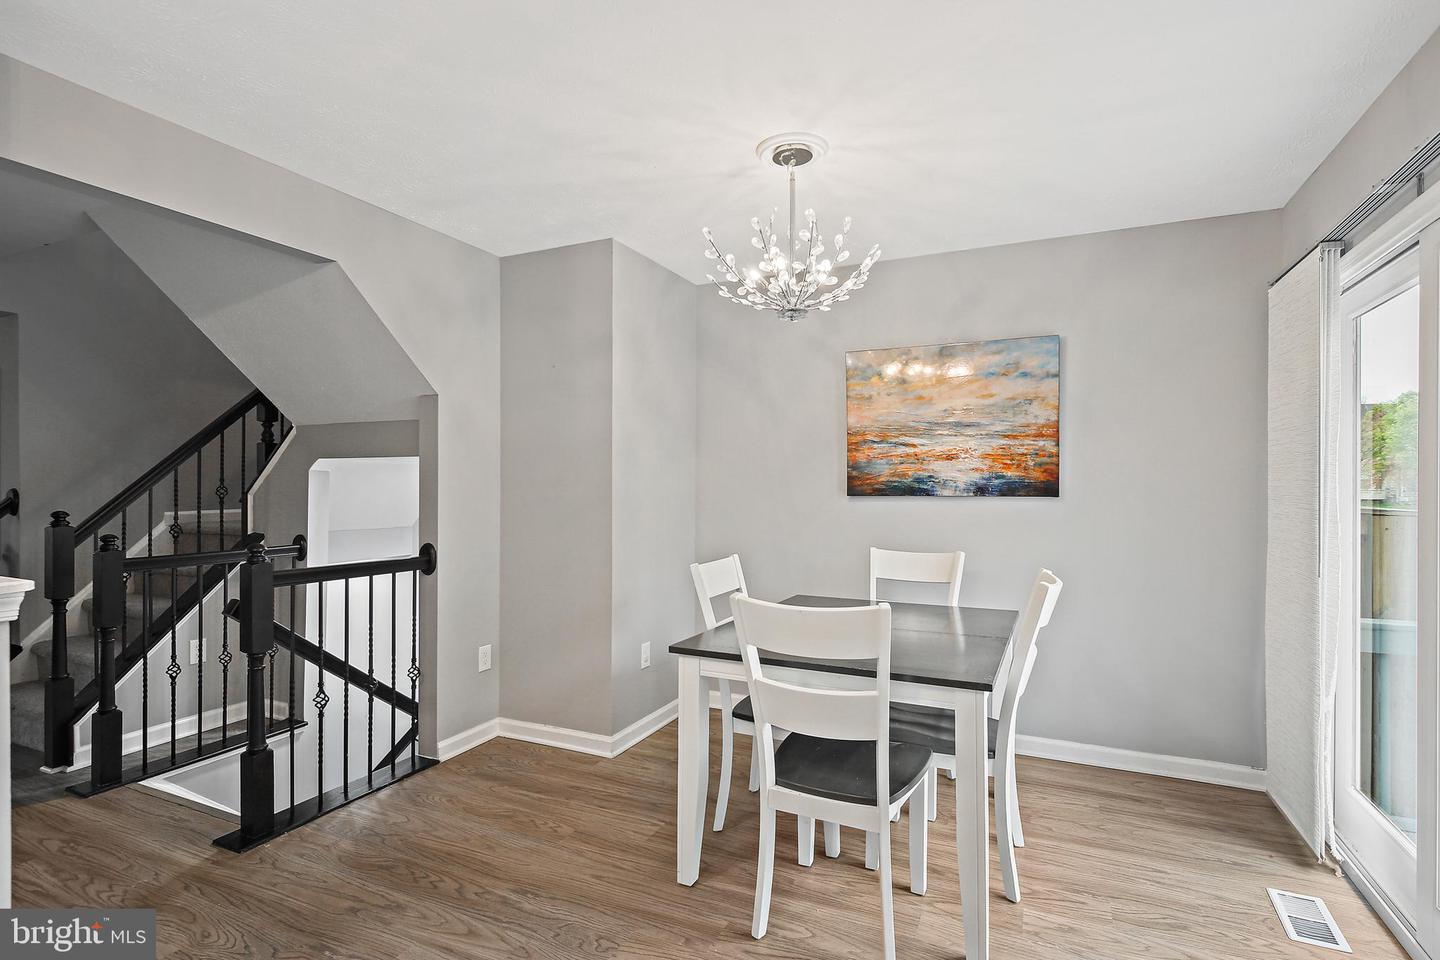 Photo 6 of 32 of 5433 Canonbury townhome